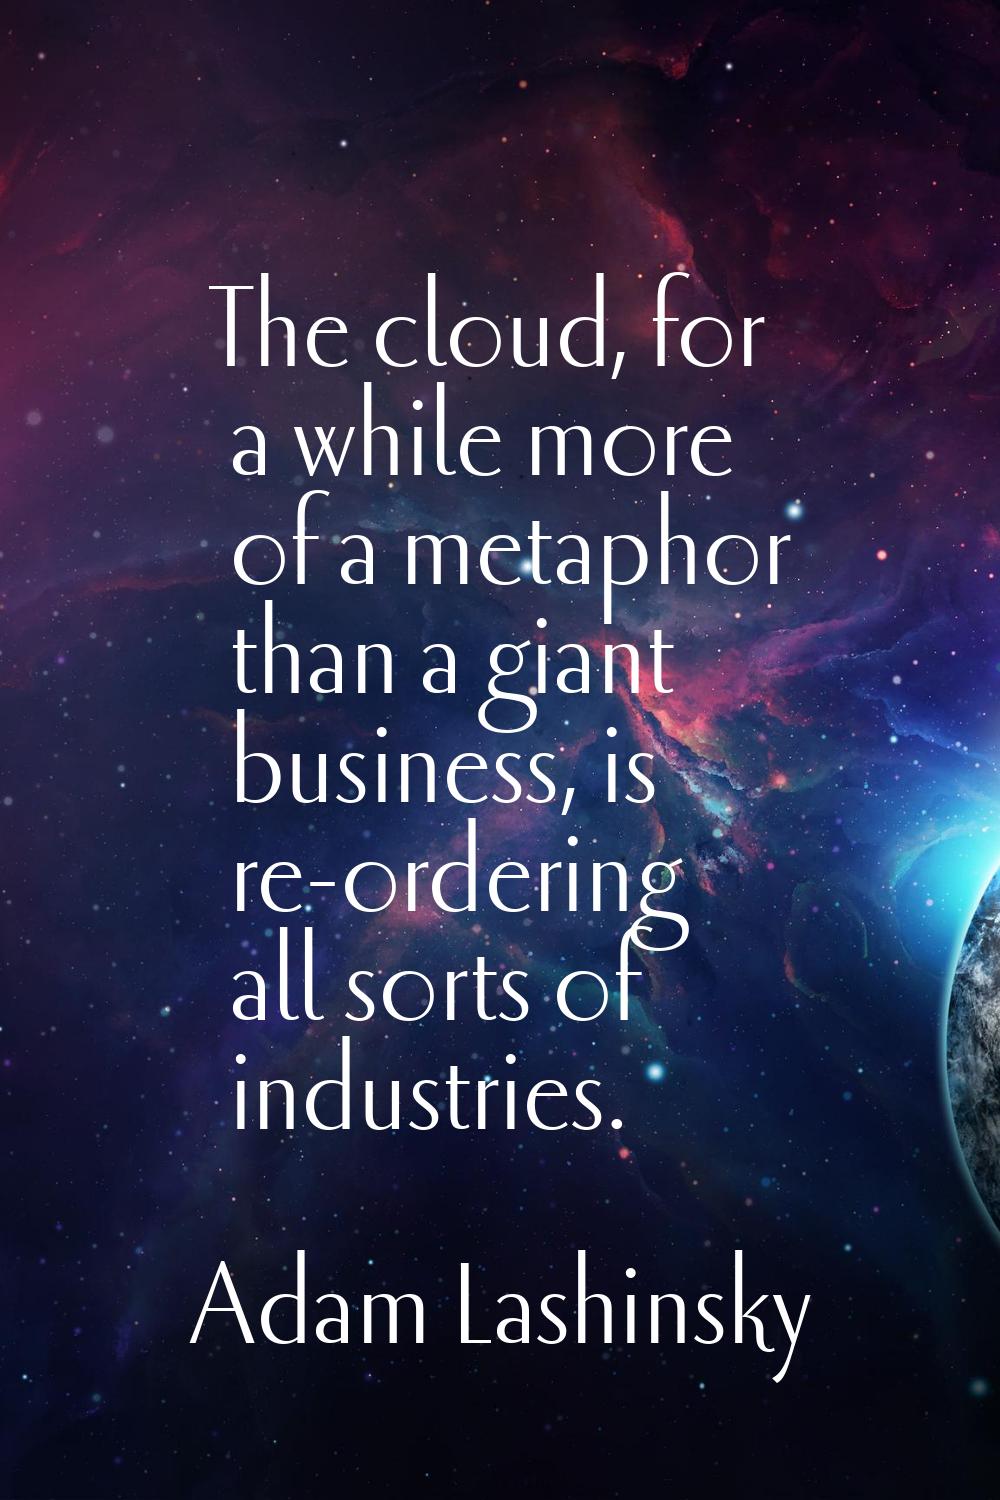 The cloud, for a while more of a metaphor than a giant business, is re-ordering all sorts of indust